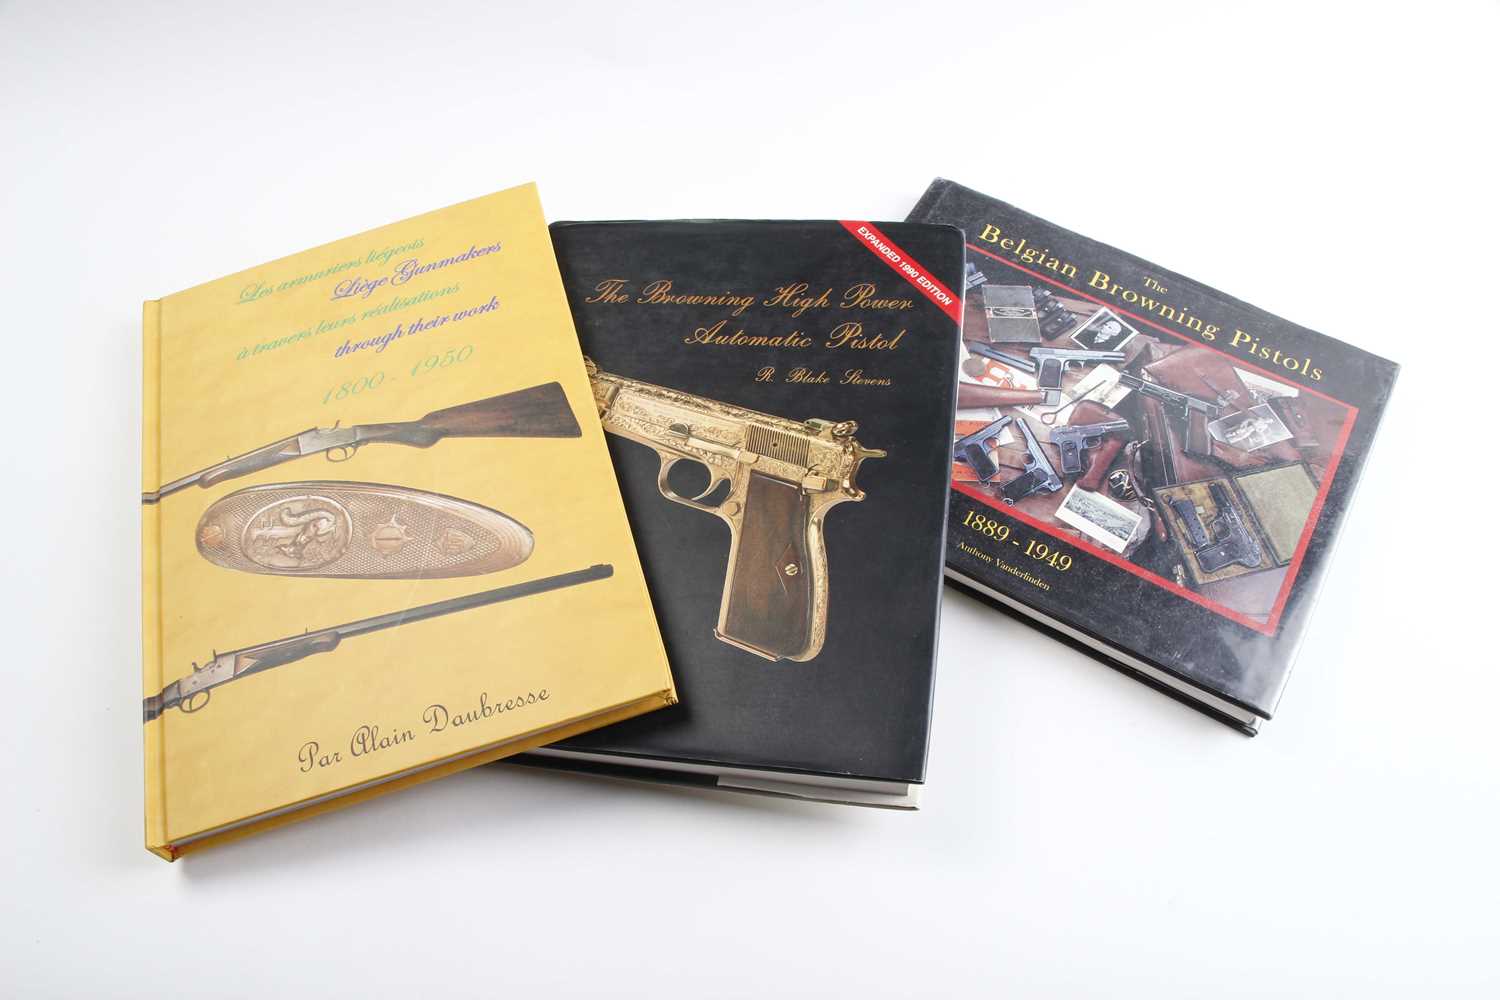 3 Vols: The Browning High Power Automatic Pistol by R. Blake Stevens; Liege Gunmakers 1800-1950 by